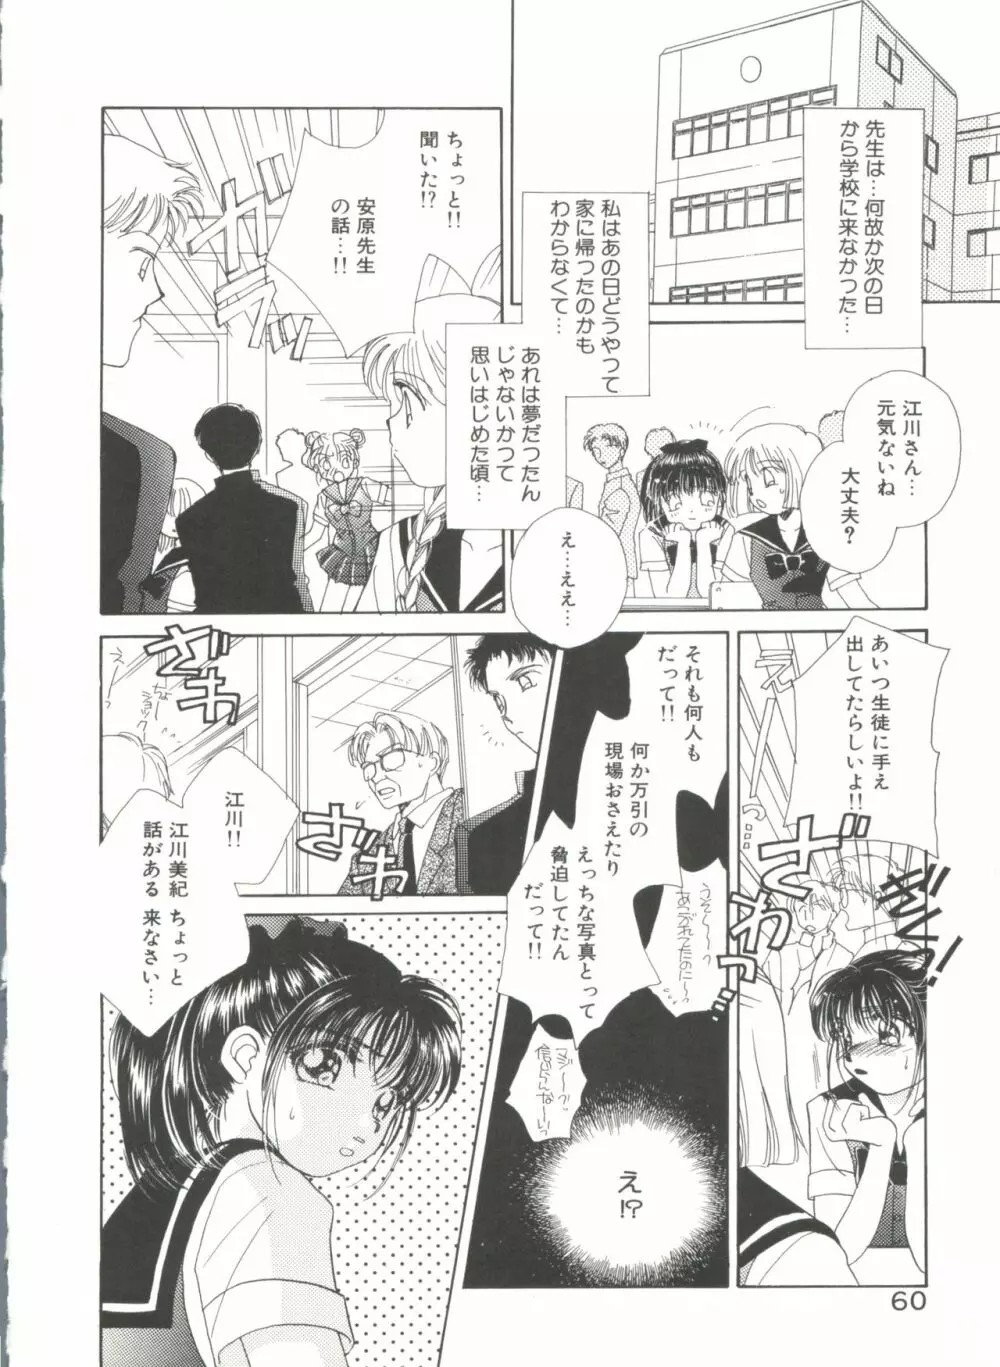 STUDY AFTER SCHOOL Page.58